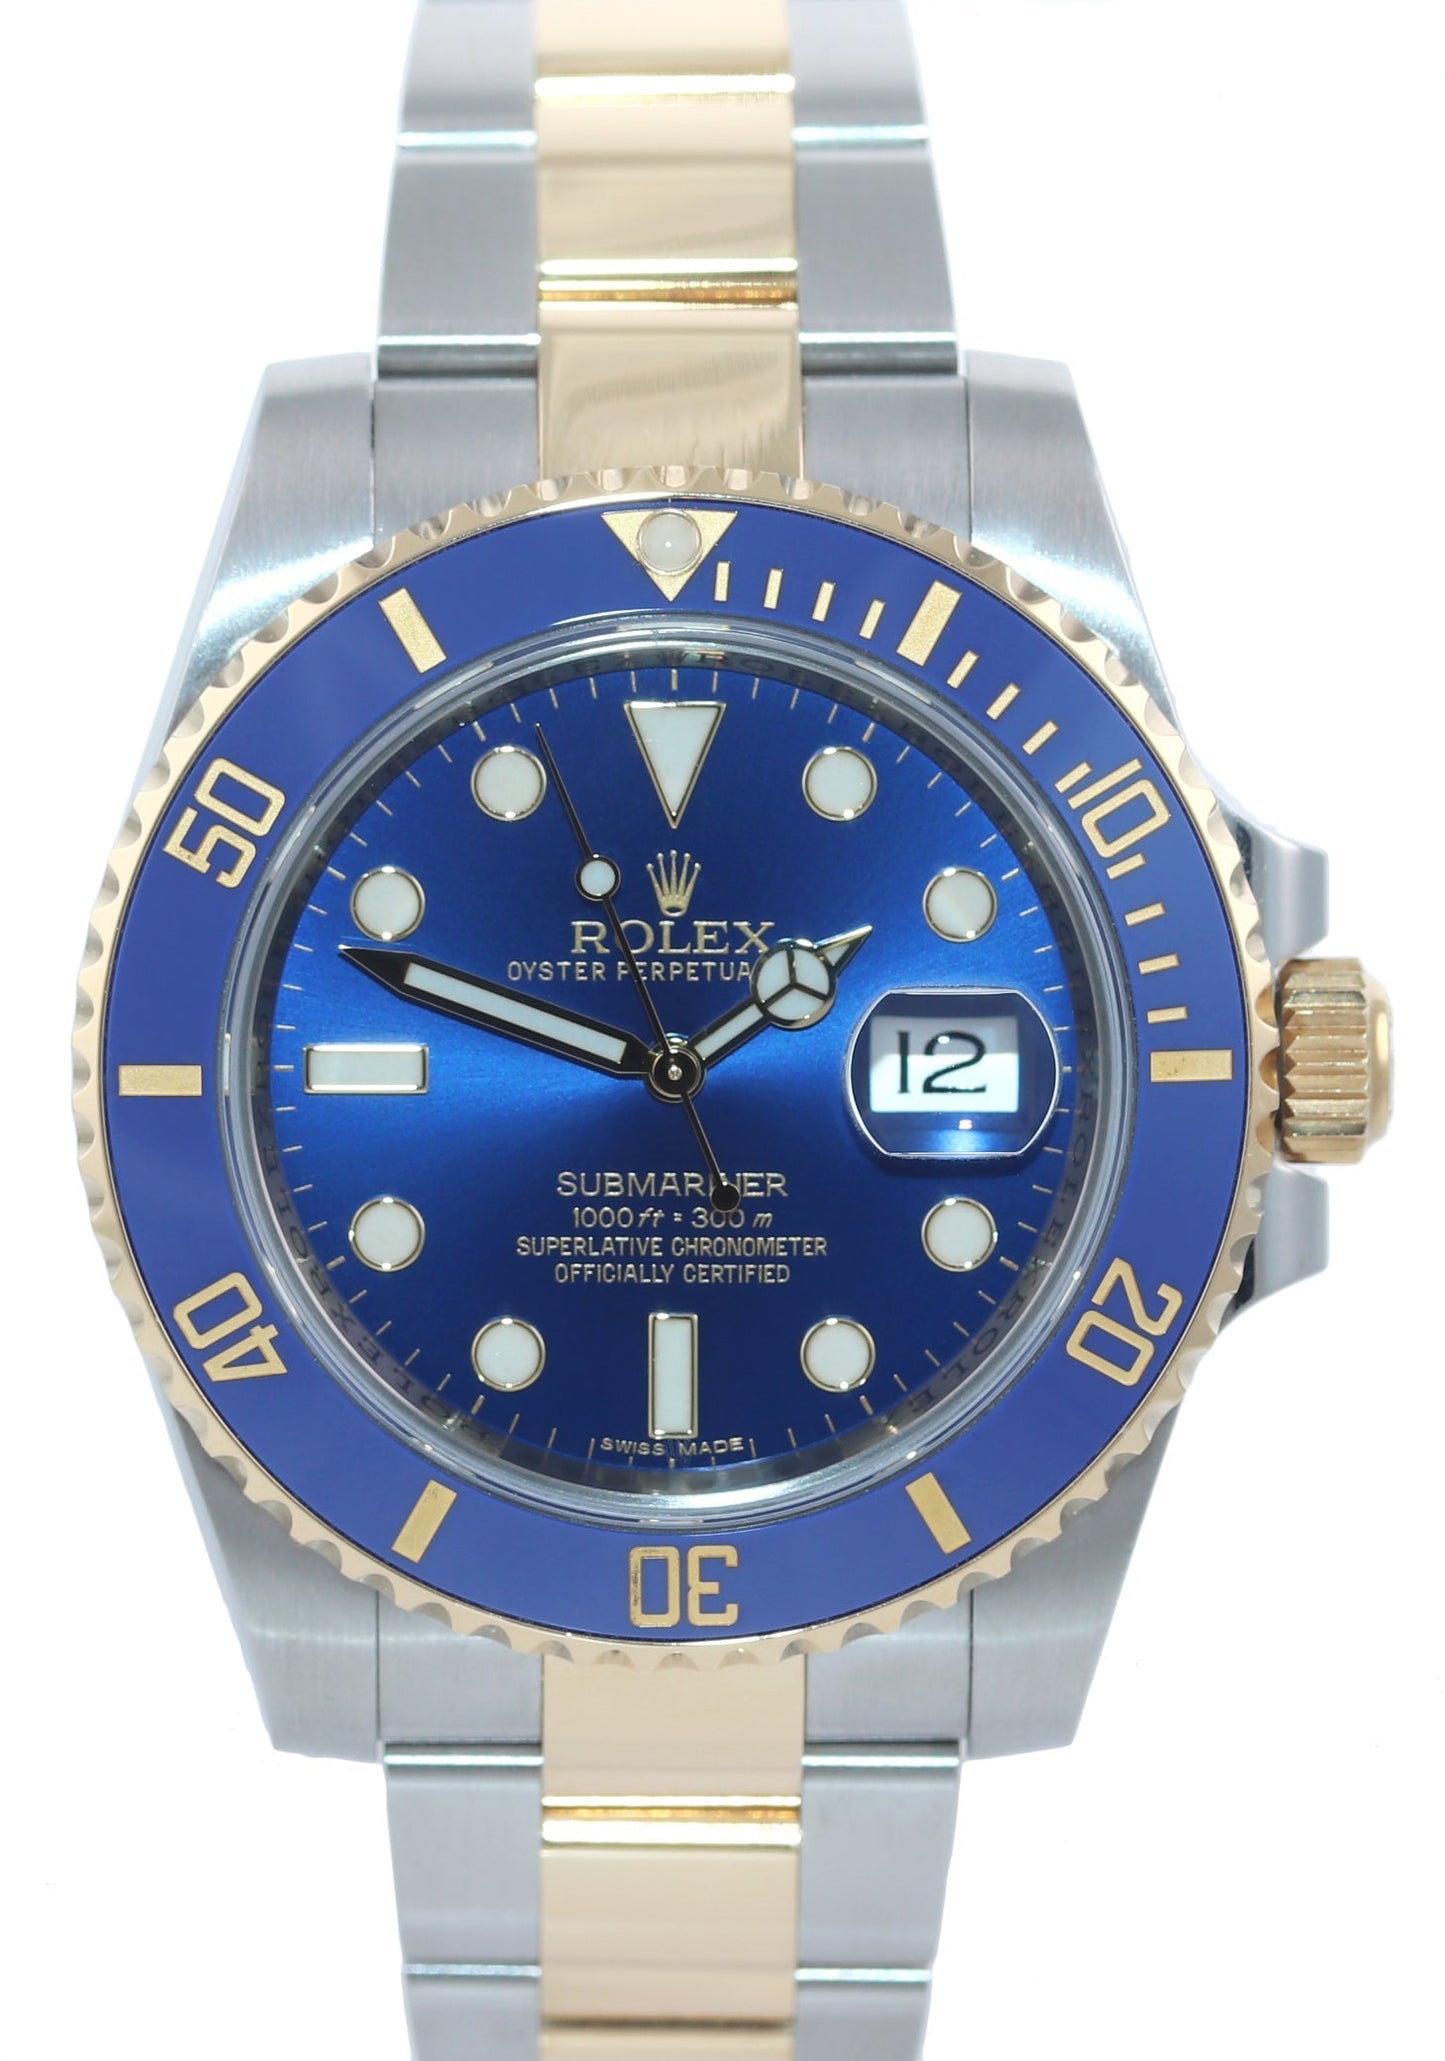 2017 MINT BOX PAPERS Rolex Submariner Blue Ceramic 116613 Two Tone Gold Watch